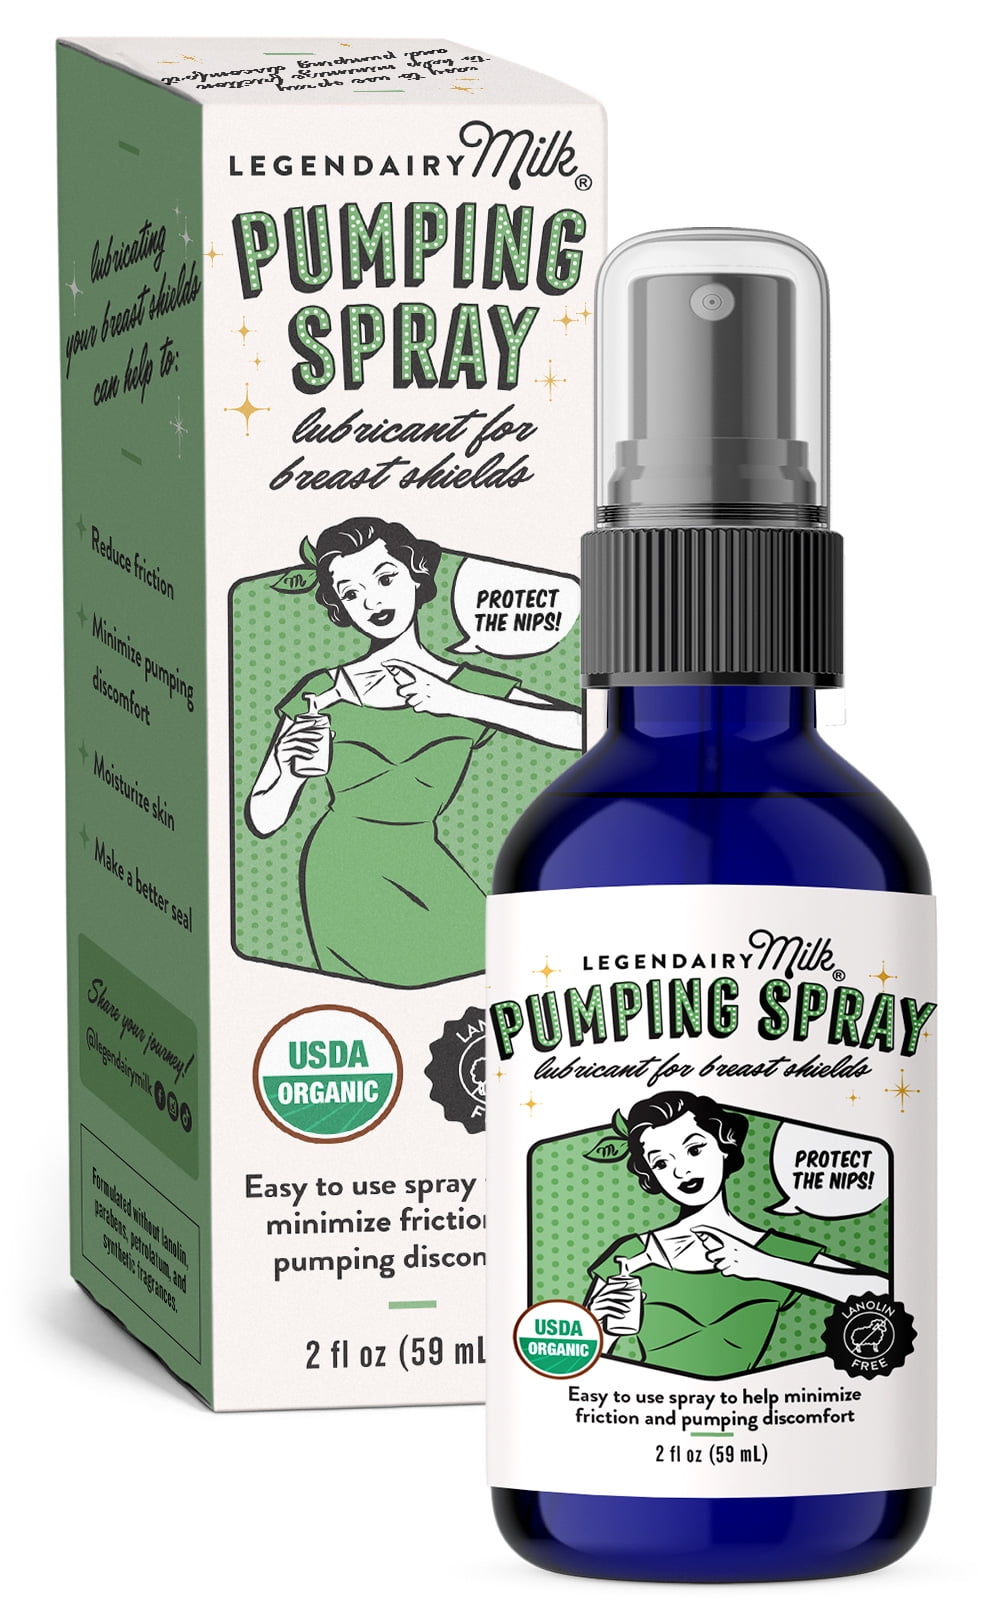 Pumping Spray, Organic Breast Pump Spray, Vegan Lubricant for Breast Shield  and Pump Flange, Prevent Clogged Ducts, Reduces Friction, Soreness Relief